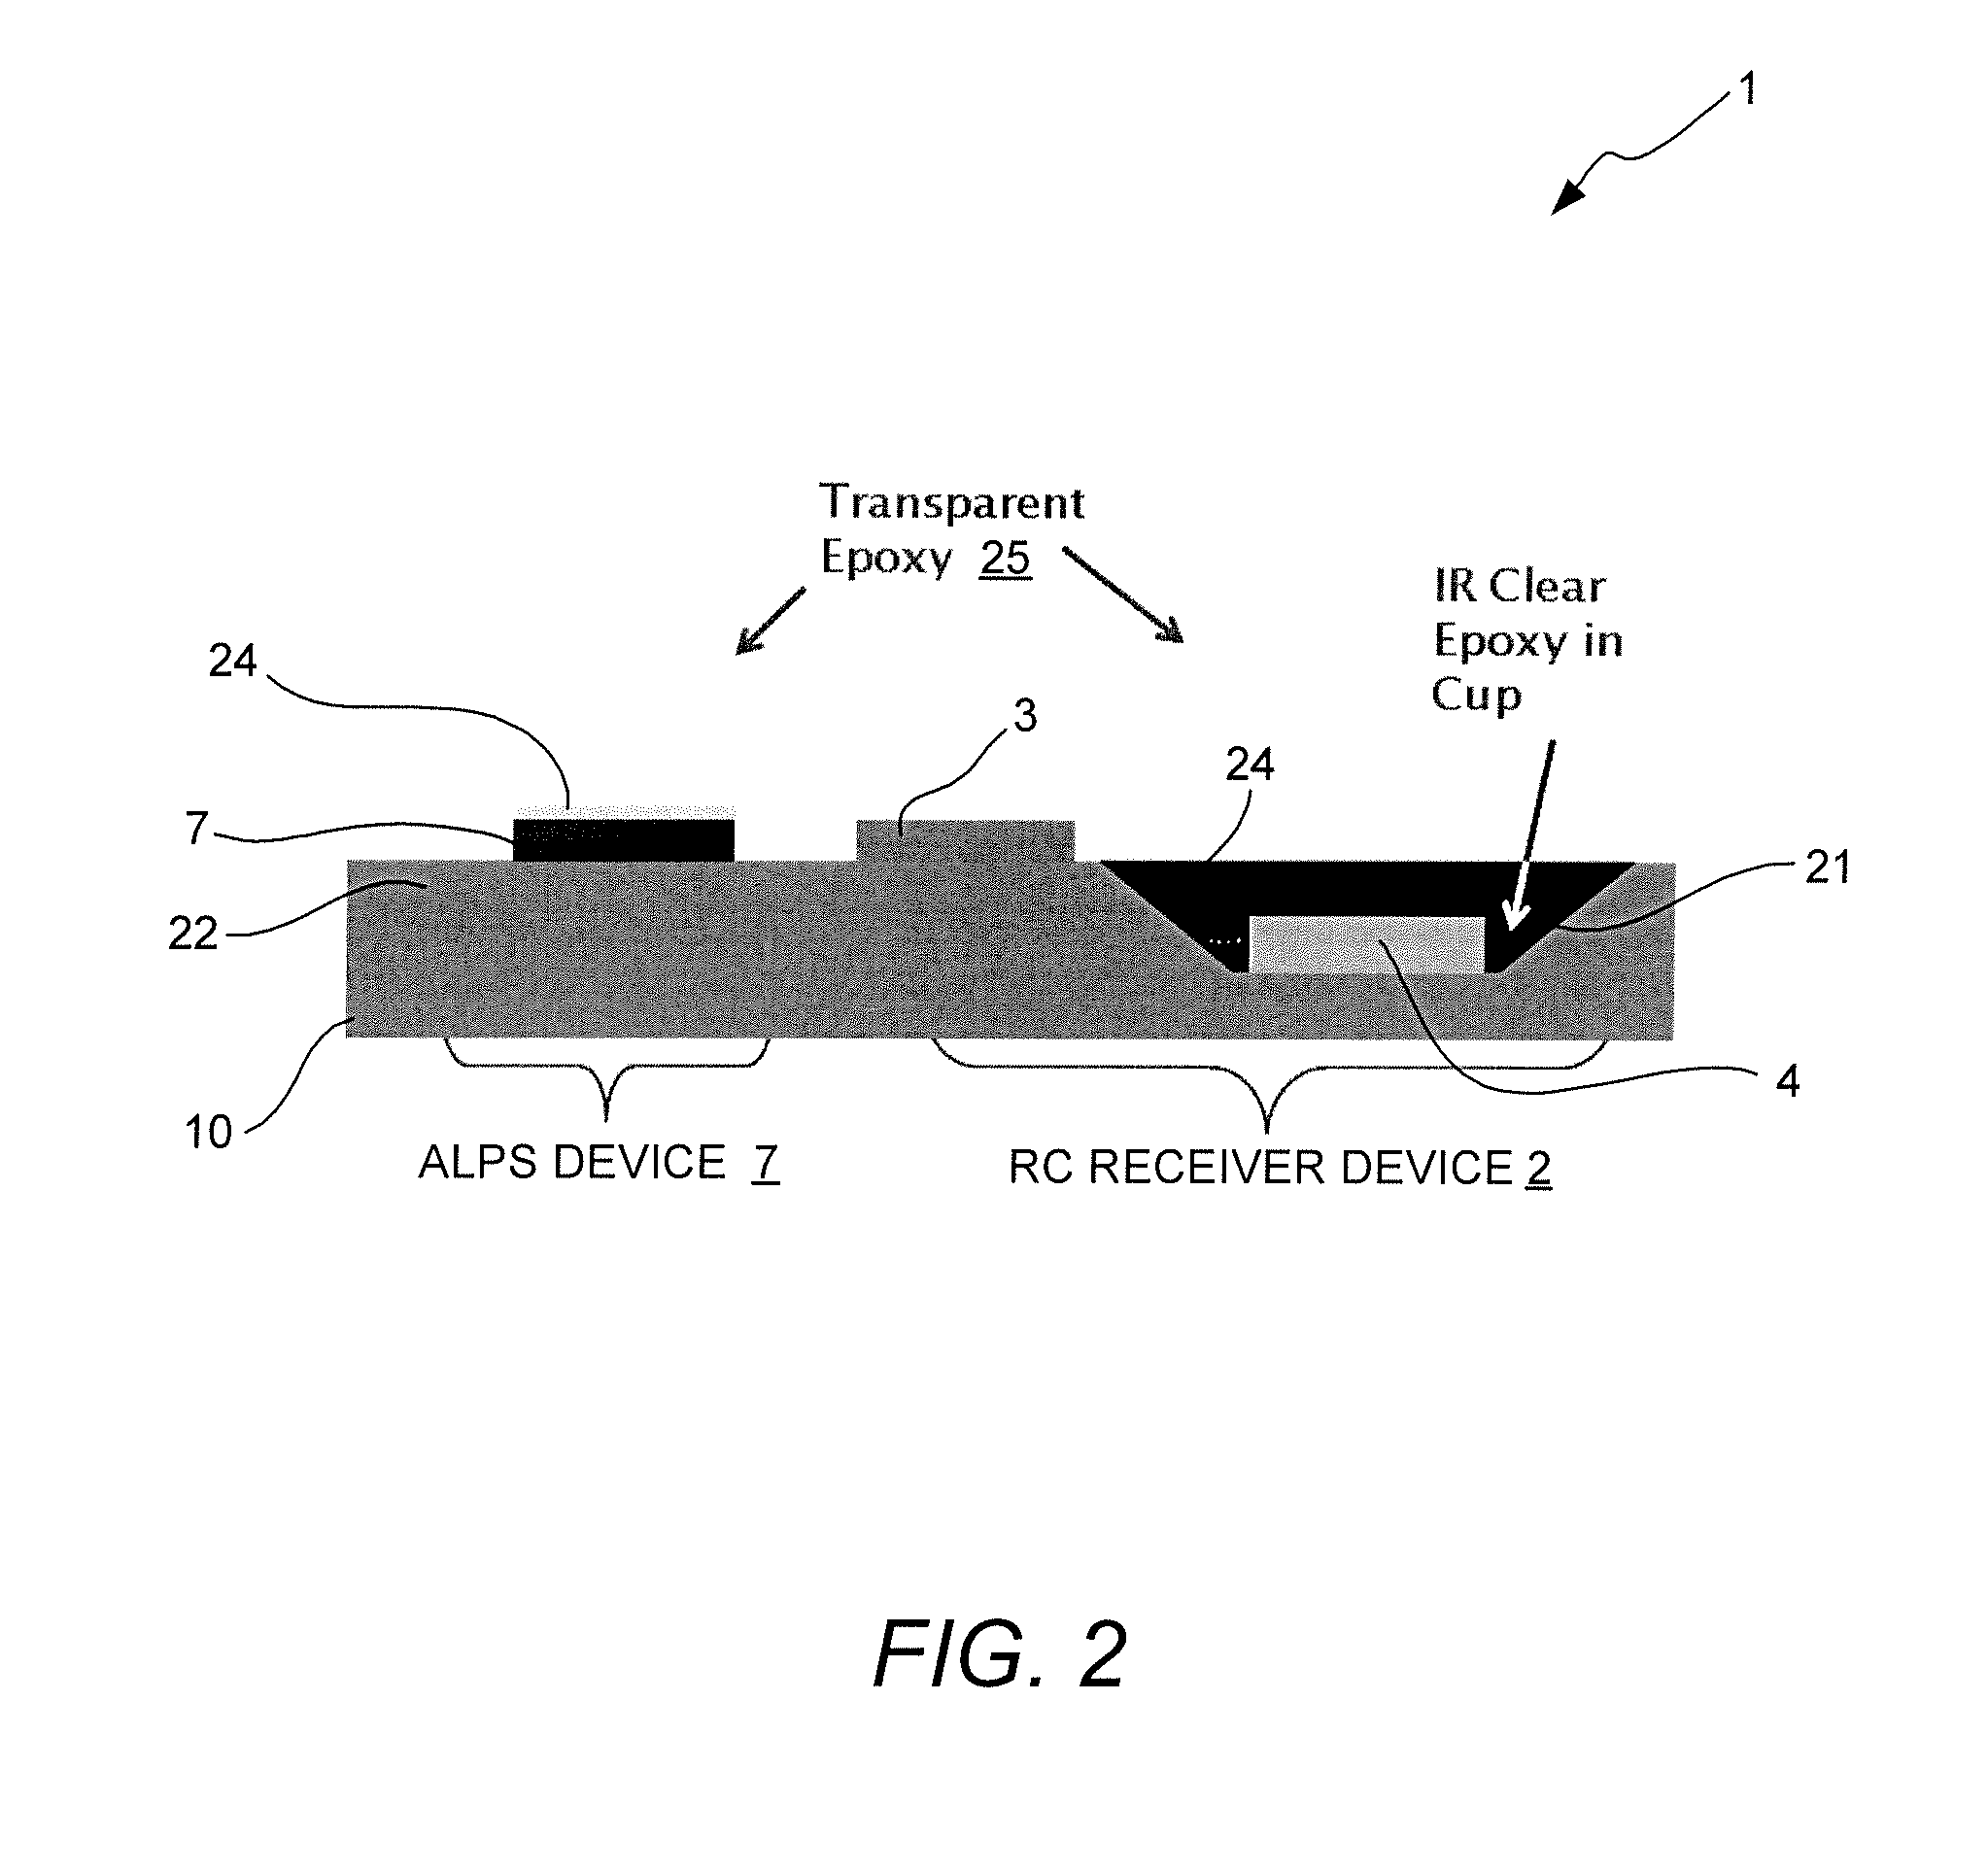 Remote control receiver device and ambient light photosensor device incorporated into a single composite assembly